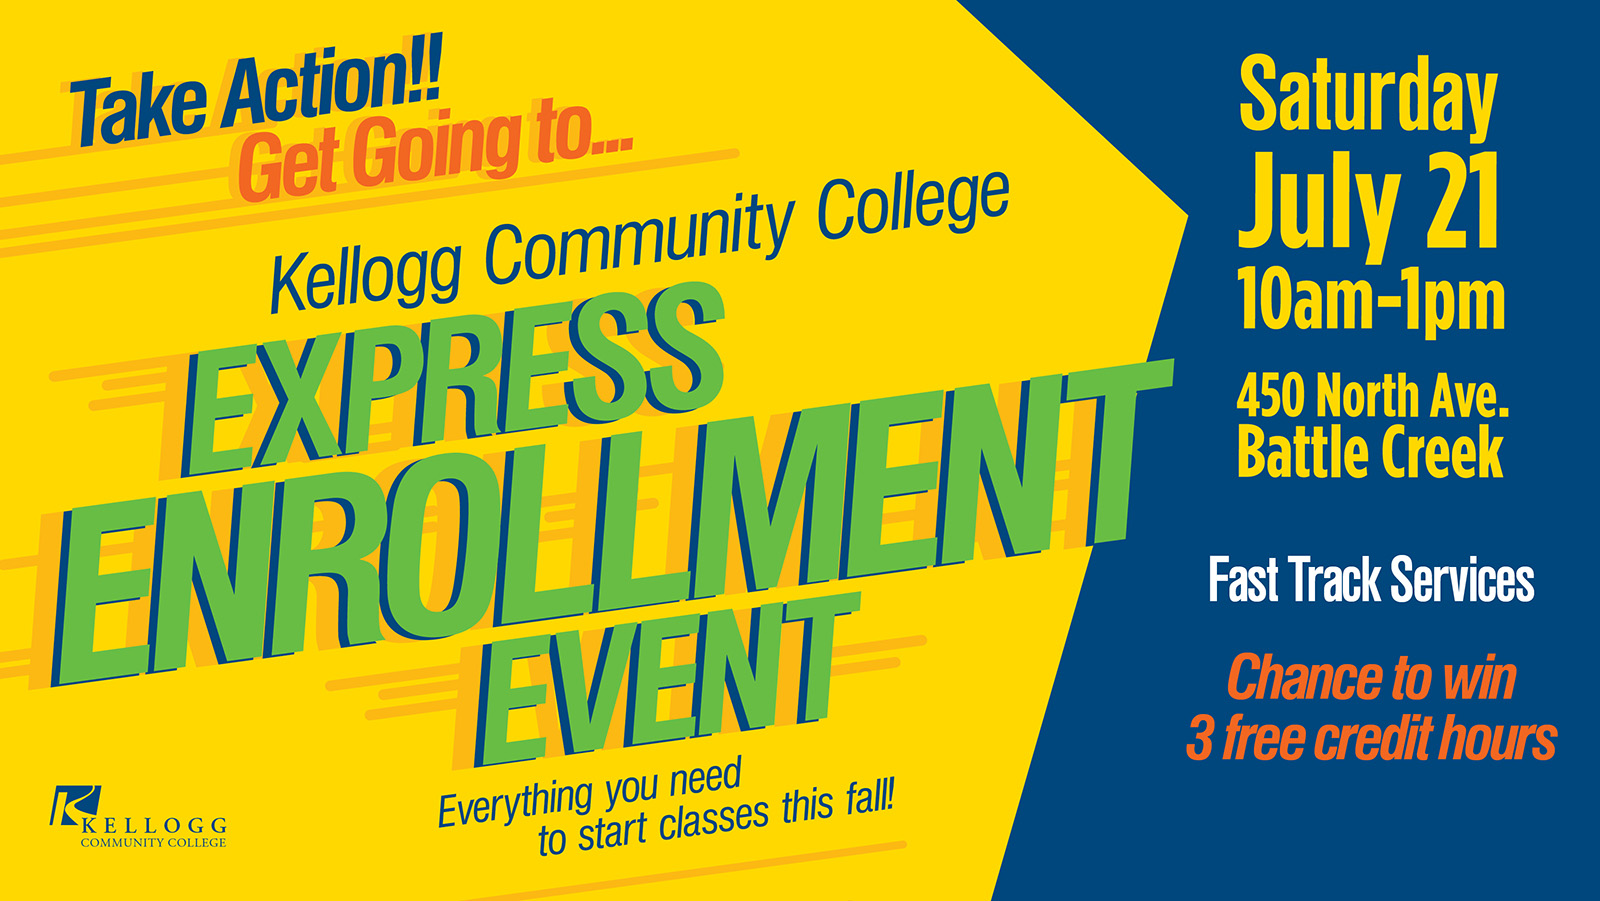 A text slide promoting KCC's Express Enrollment Event, scheduled for 10 a.m. to 1 p.m. July 21 on KCC's North Avenue campus in Battle Creek.